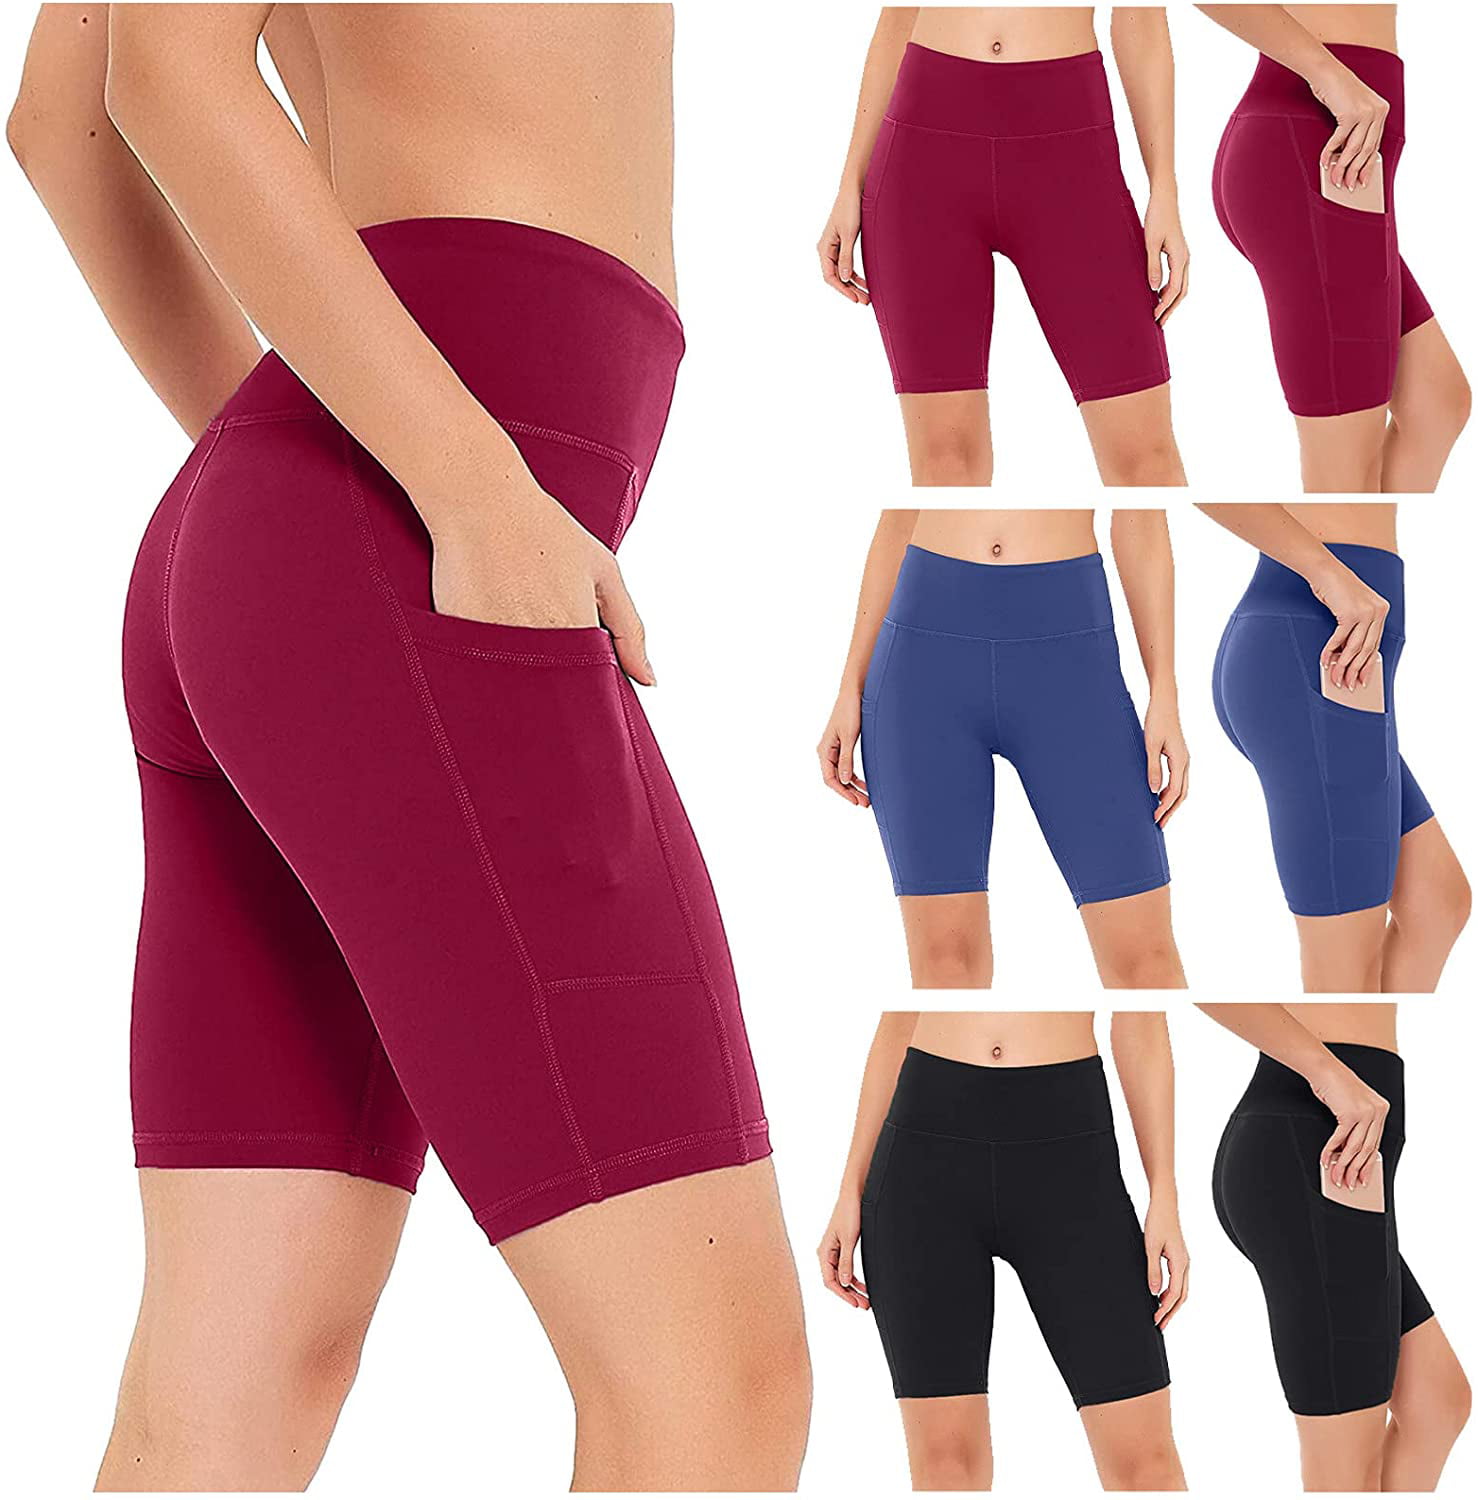 Tummy Control Stretchy Yoga Shorts for Workout Running High Waist Biker Shorts with Pockets for Women